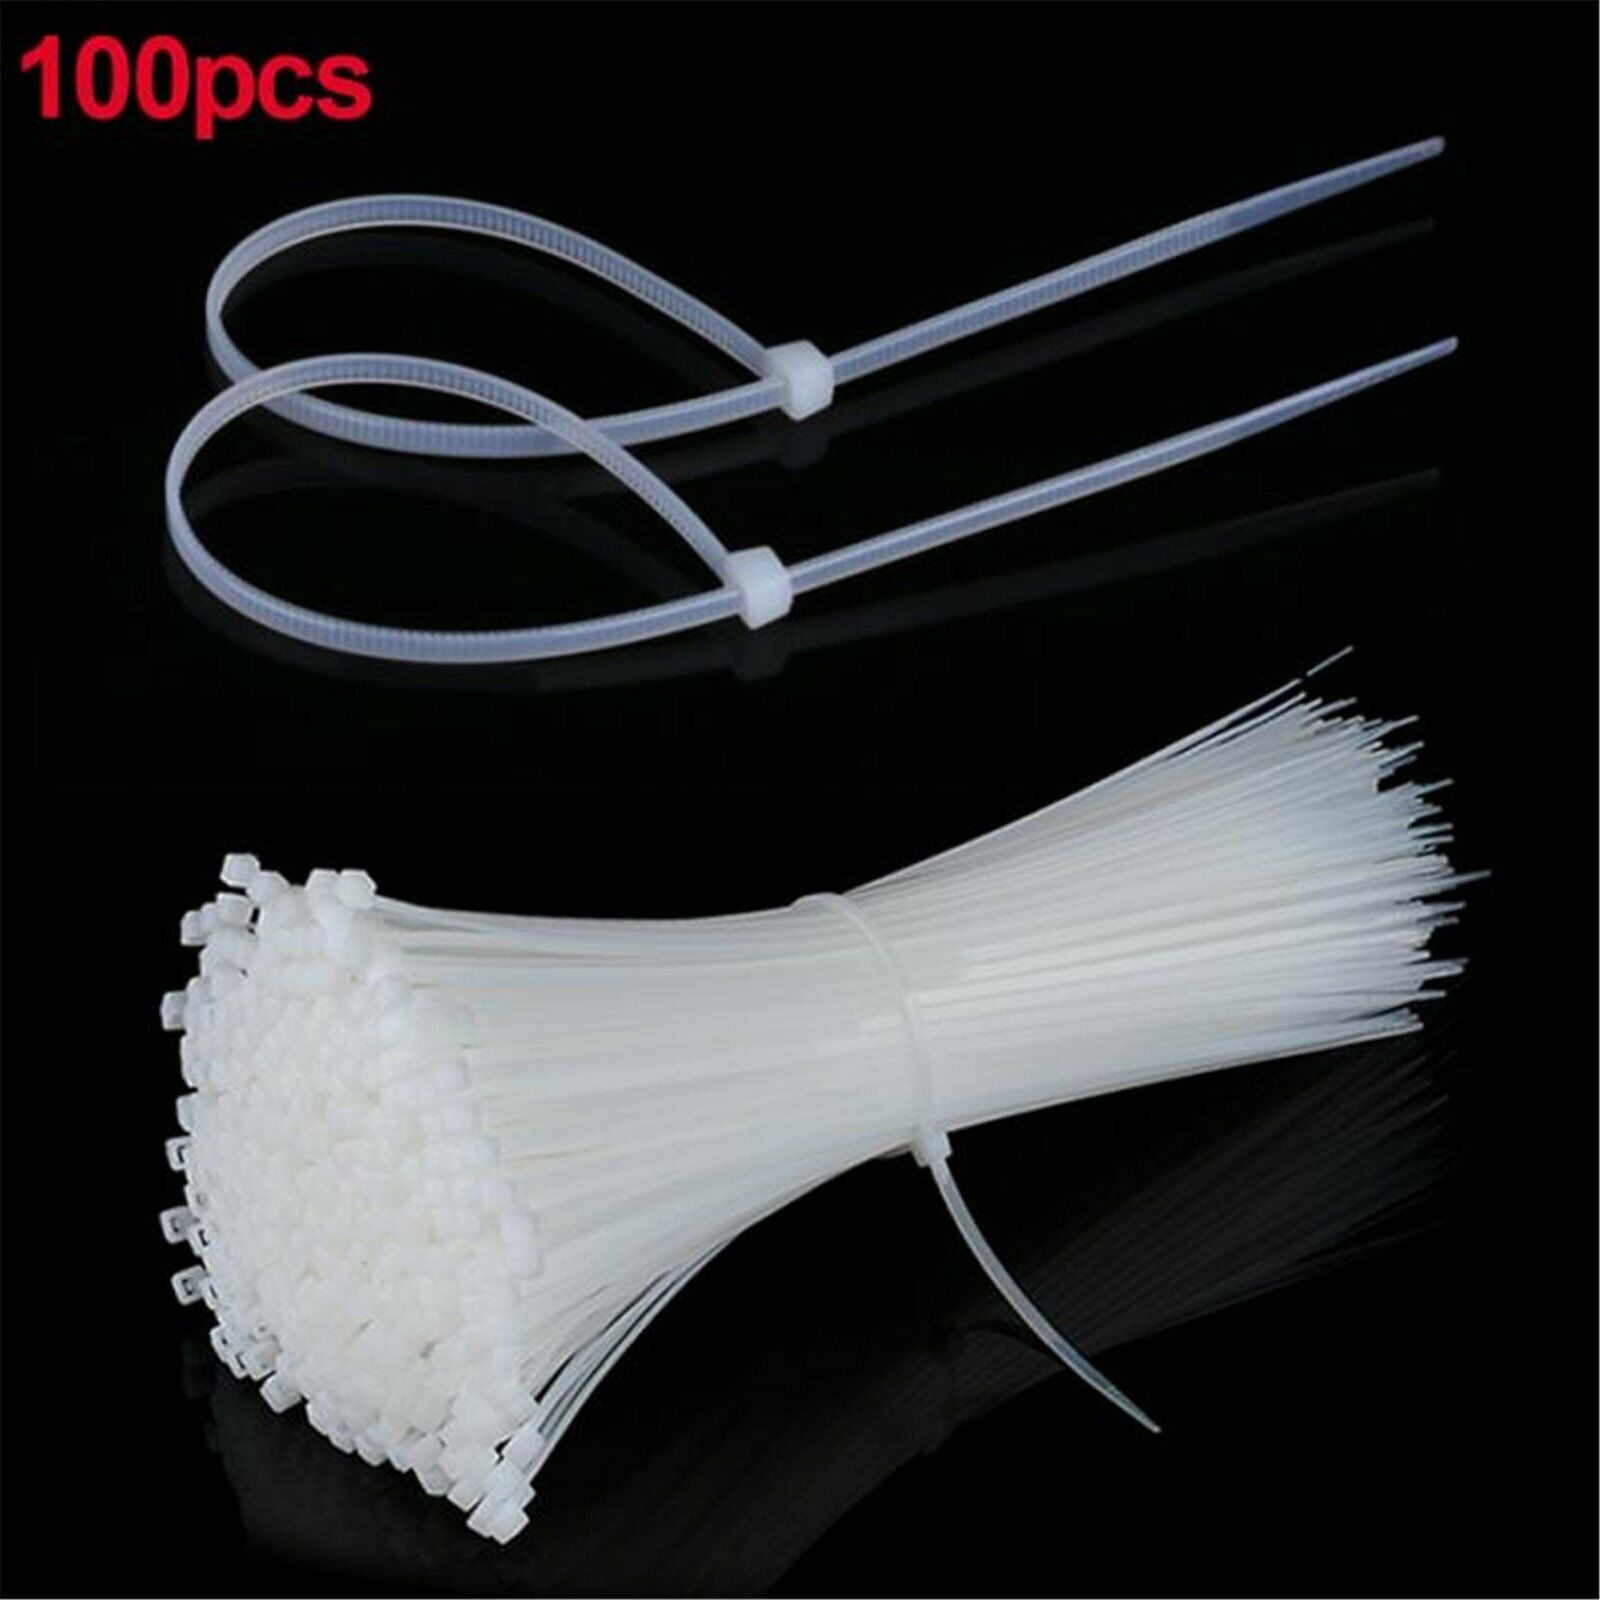 Free shipping-Cable Ties Zip Ties Nylon UV Stabilized 100x Bulk Cable Tie